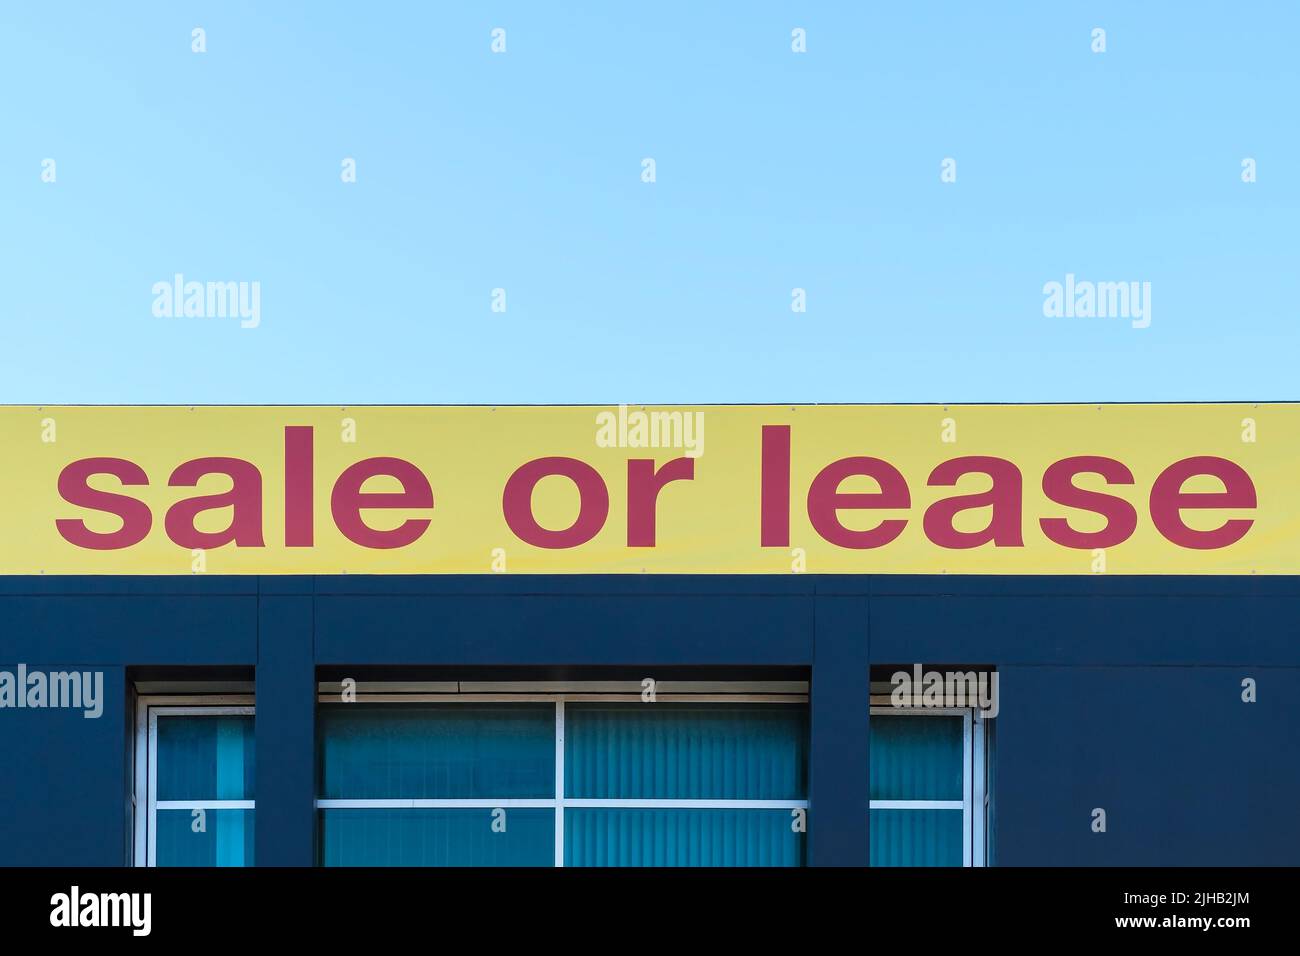 Property for sale banner displayed on the building facade in South Australia Stock Photo